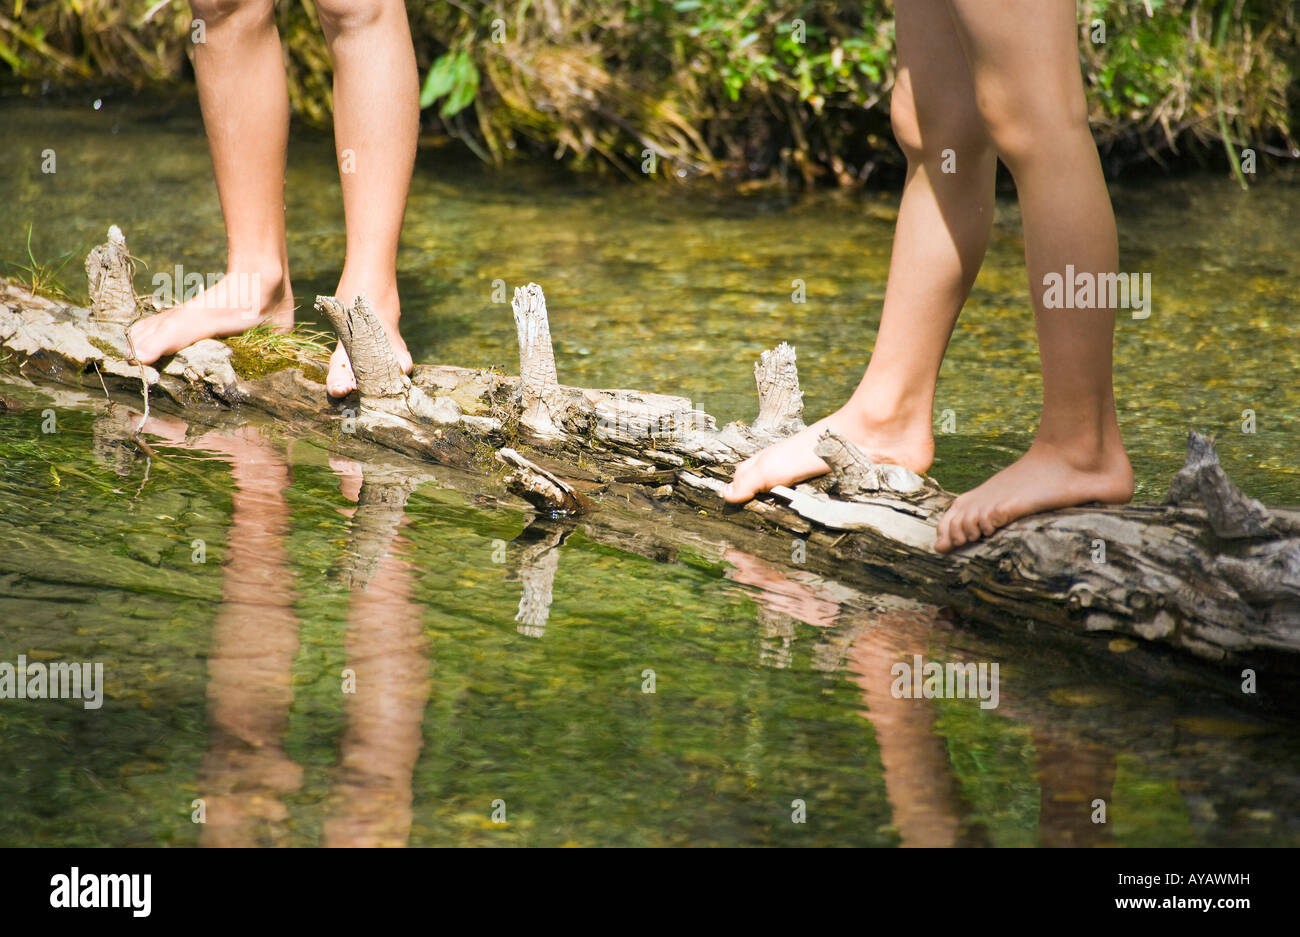 Children standing on a log in a stream Stock Photo